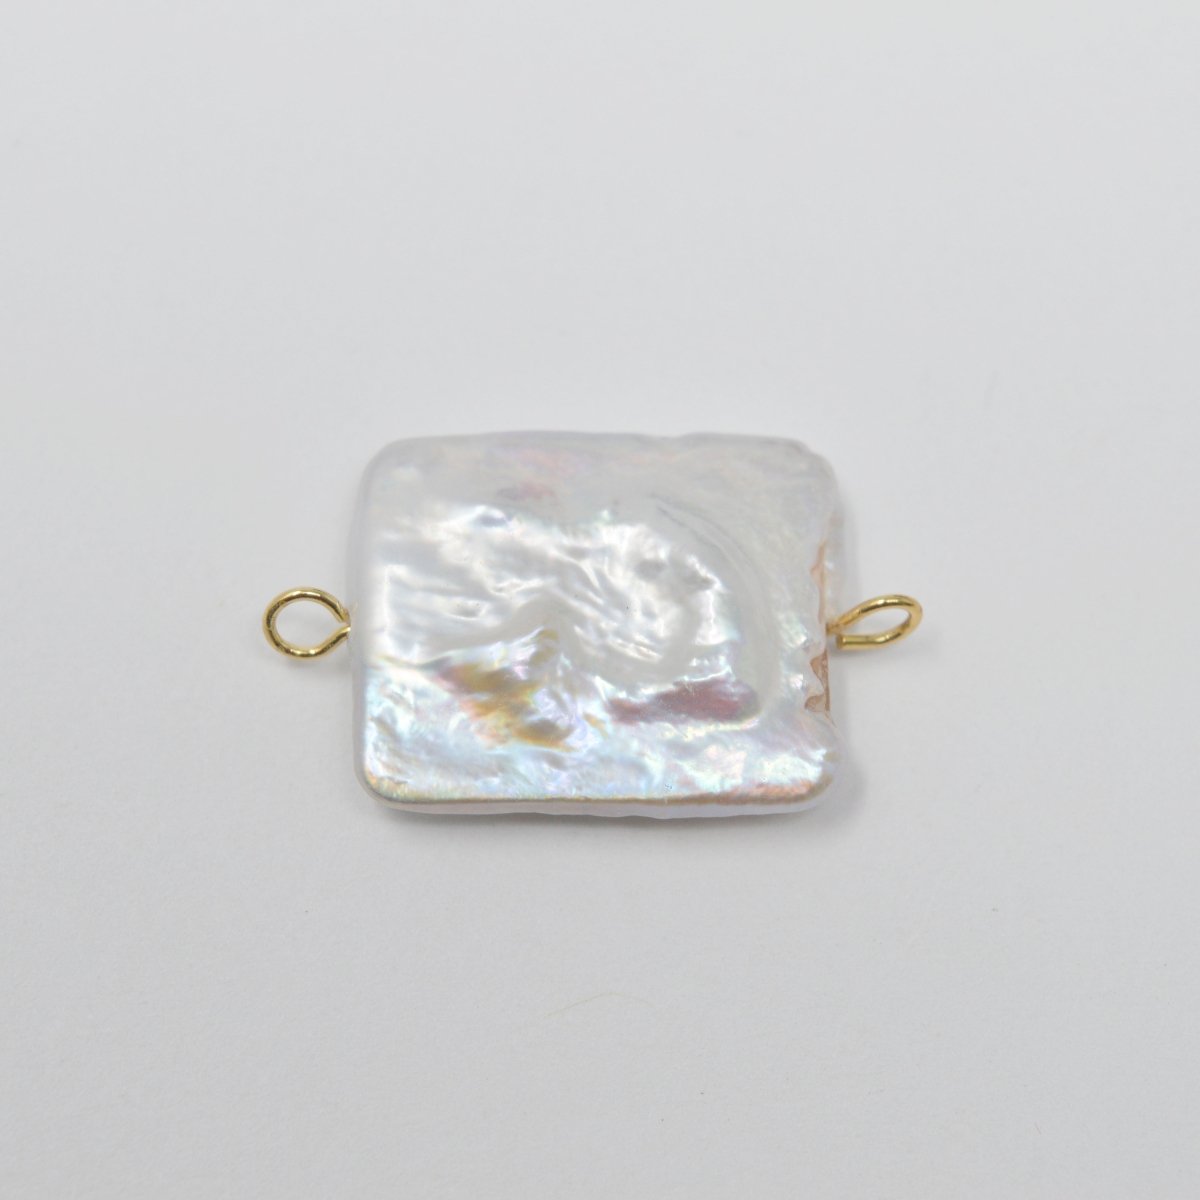 Freeform Square Shape Genuine Freshwater Pearls Connector, 15x25mm, Irregular Rectangle Fresh Water Keishi Pearl Beads Charm Wholesale P-1802 - DLUXCA